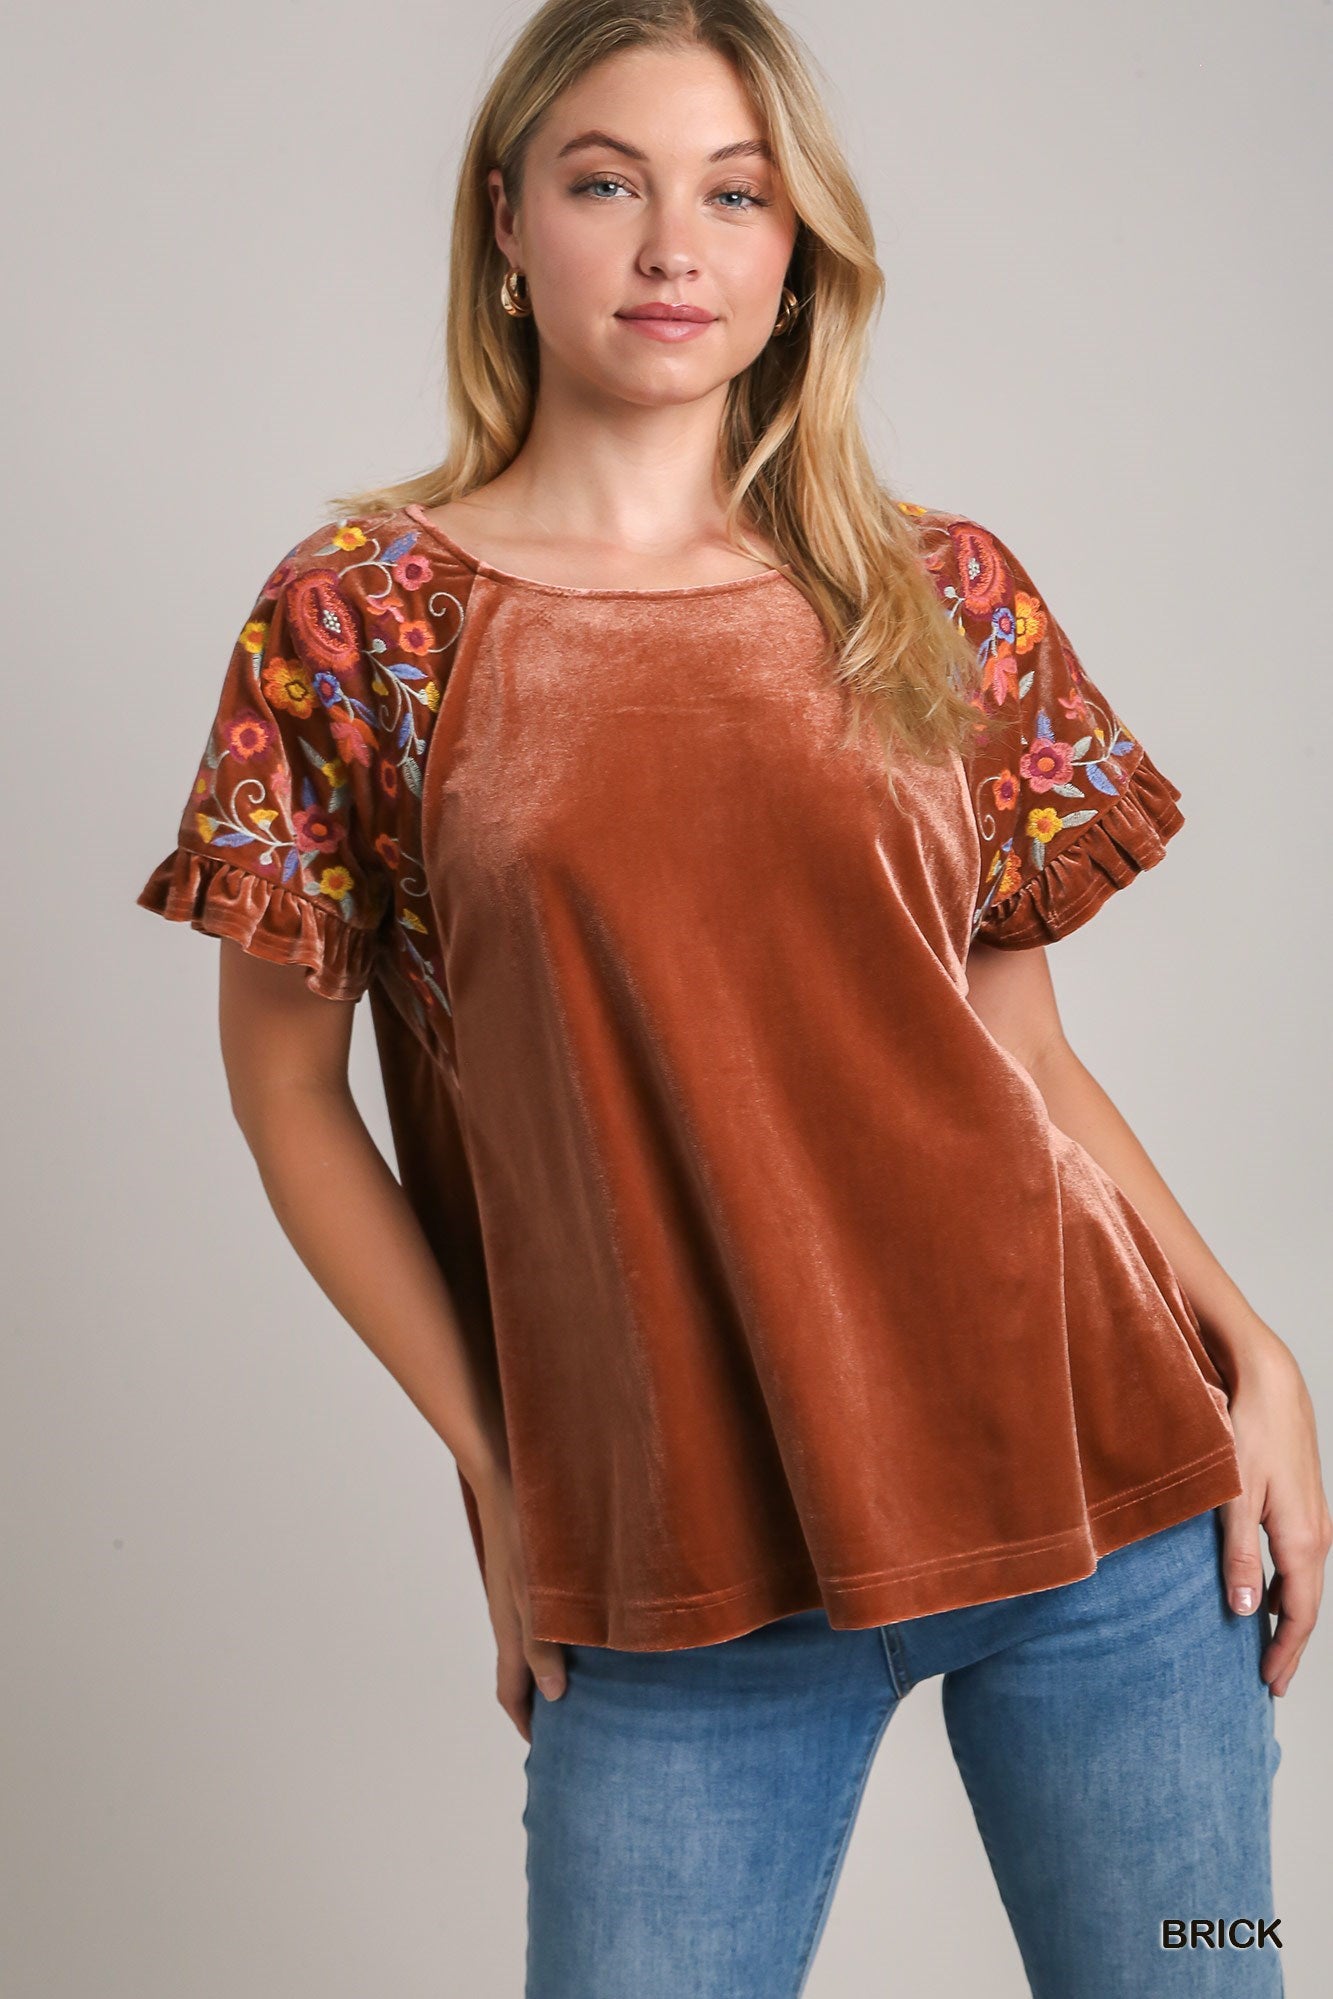 Brick Velvet Top w/ Embroidered Ruffle Sleeves